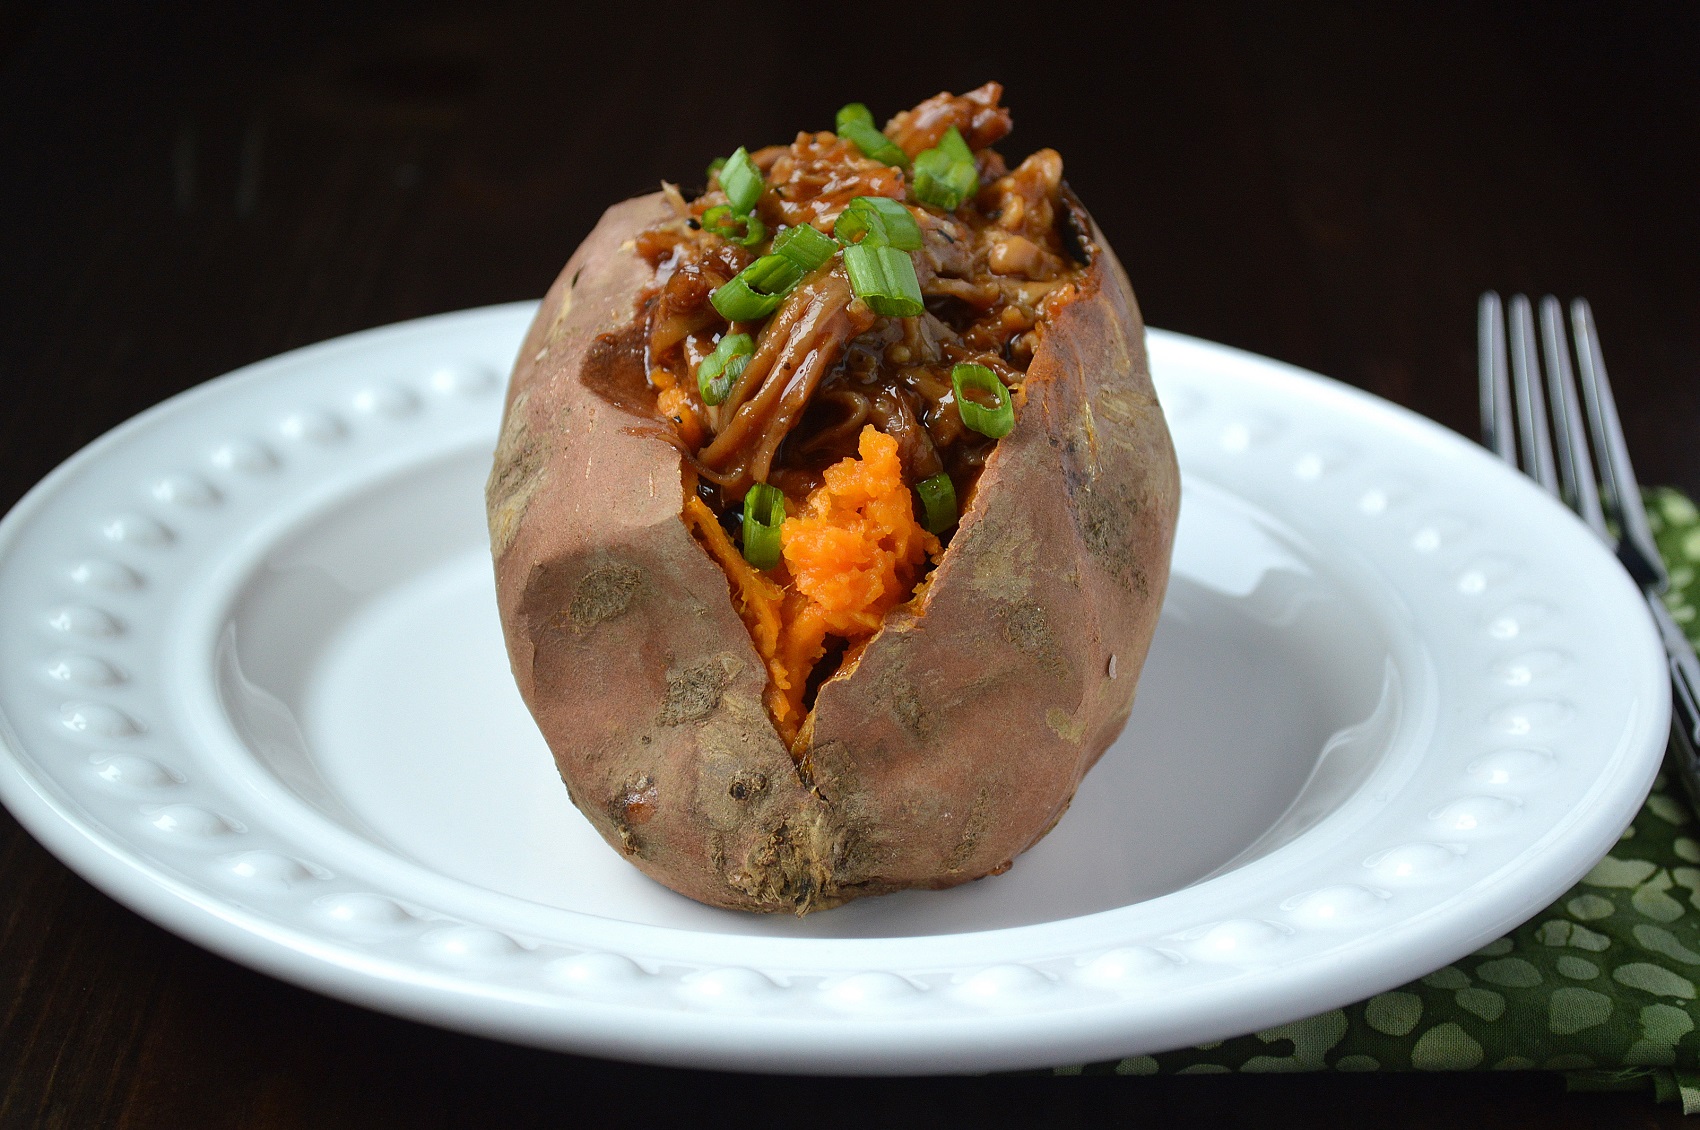 Pulled Pork Stuffed Sweet Potato So delicious together!